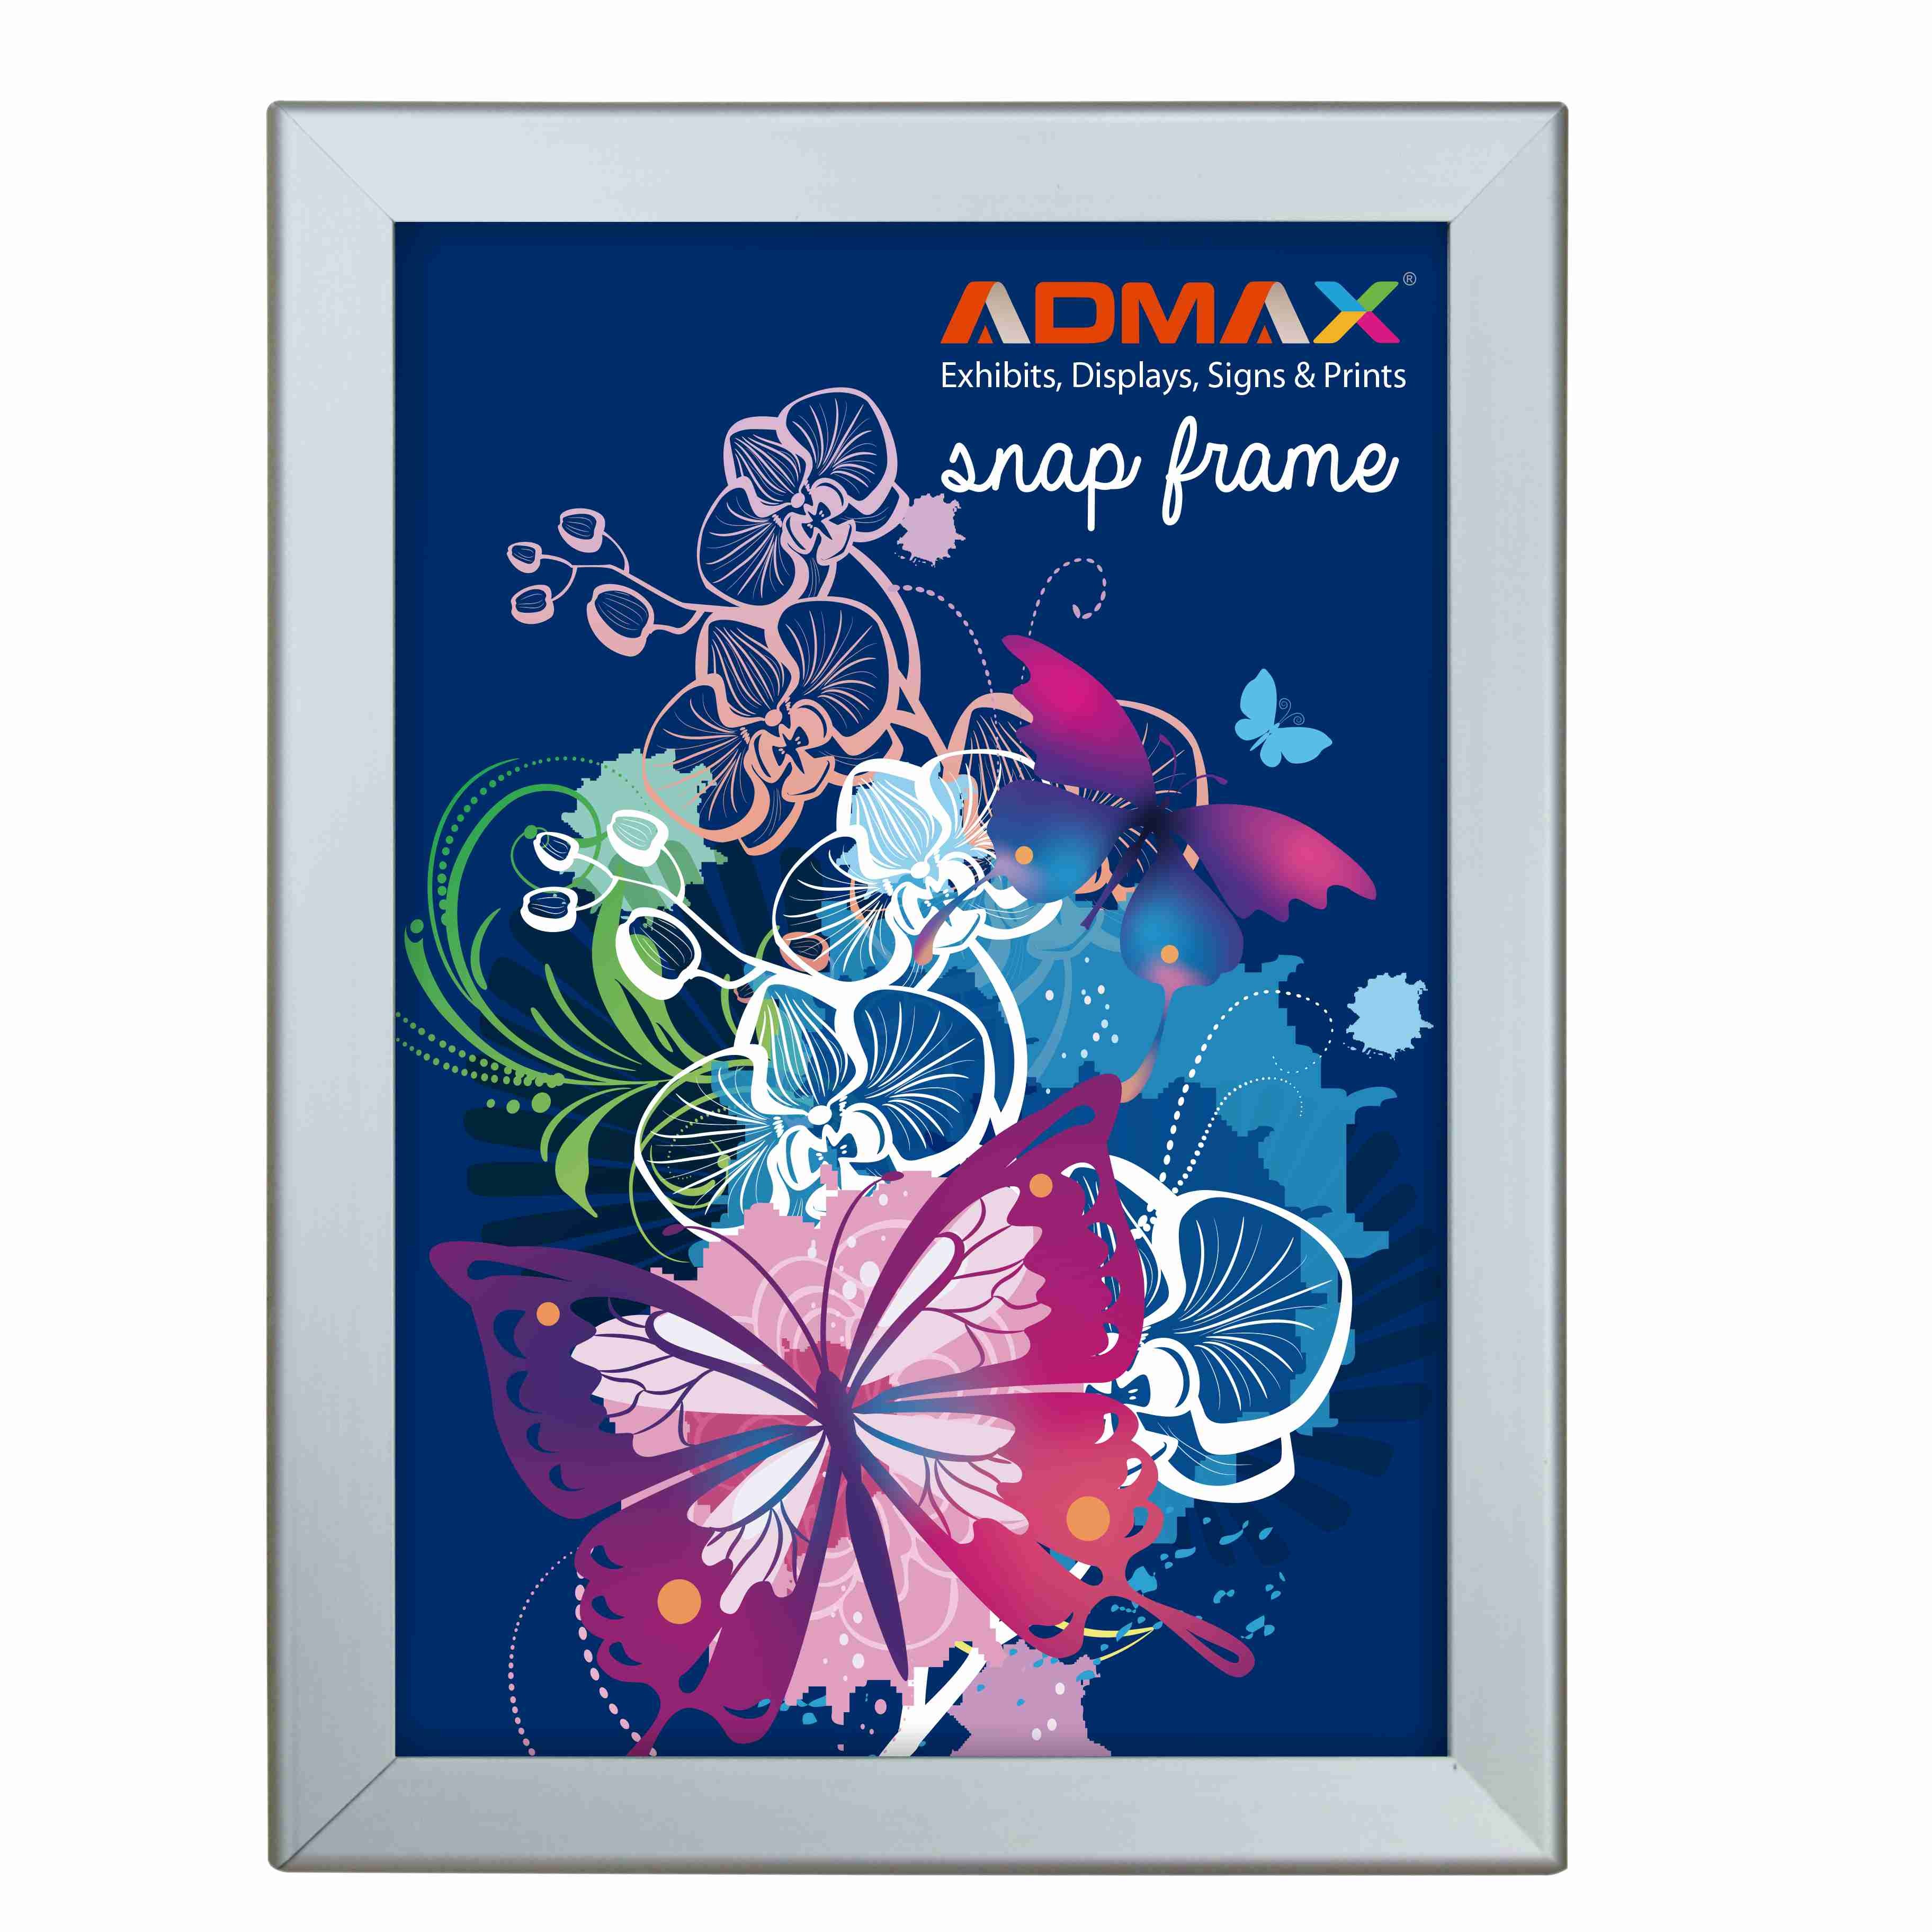  A3 Snap Poster Frames Silver Lightweight Durable Rigid Plastic Sheet Manufactures